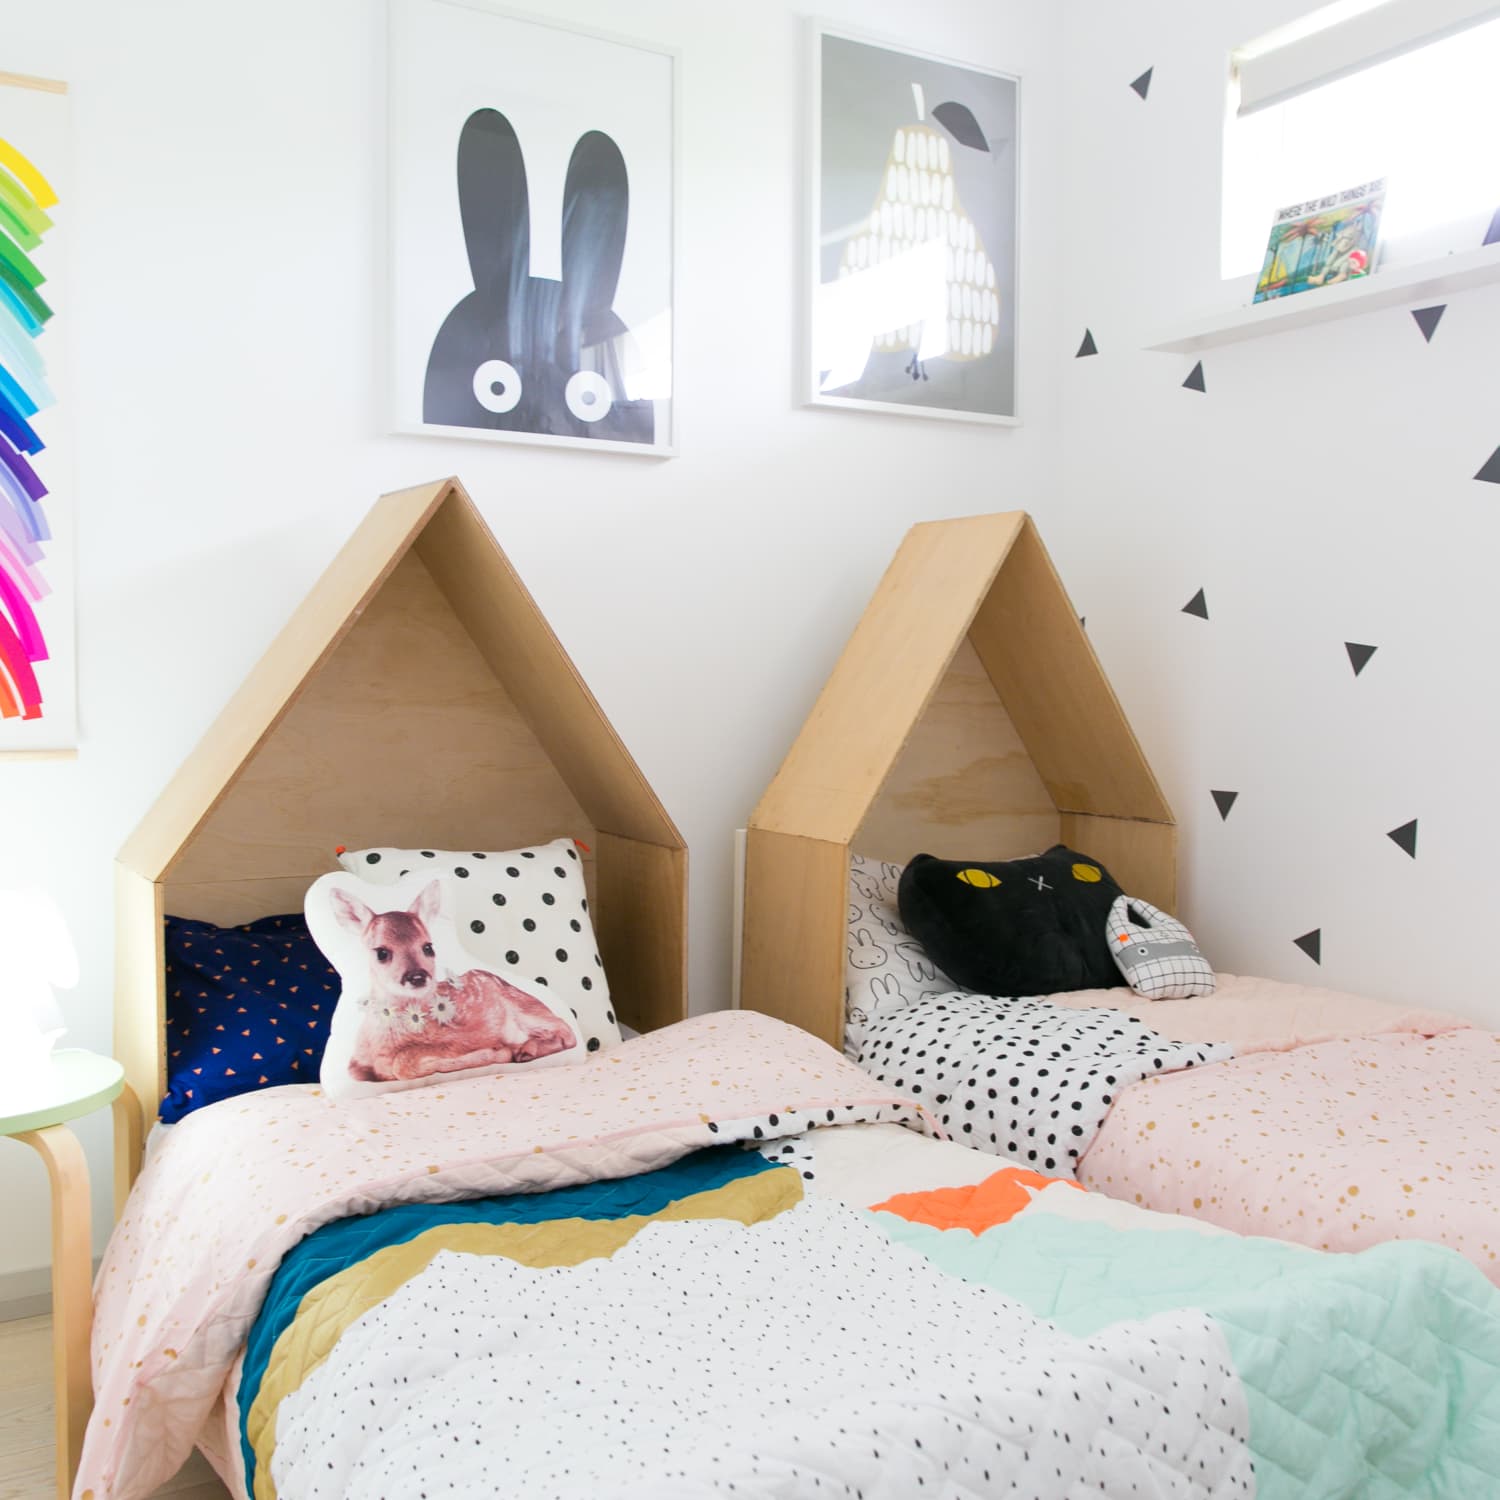 creative & fun kids bedroom decorating ideas | apartment therapy